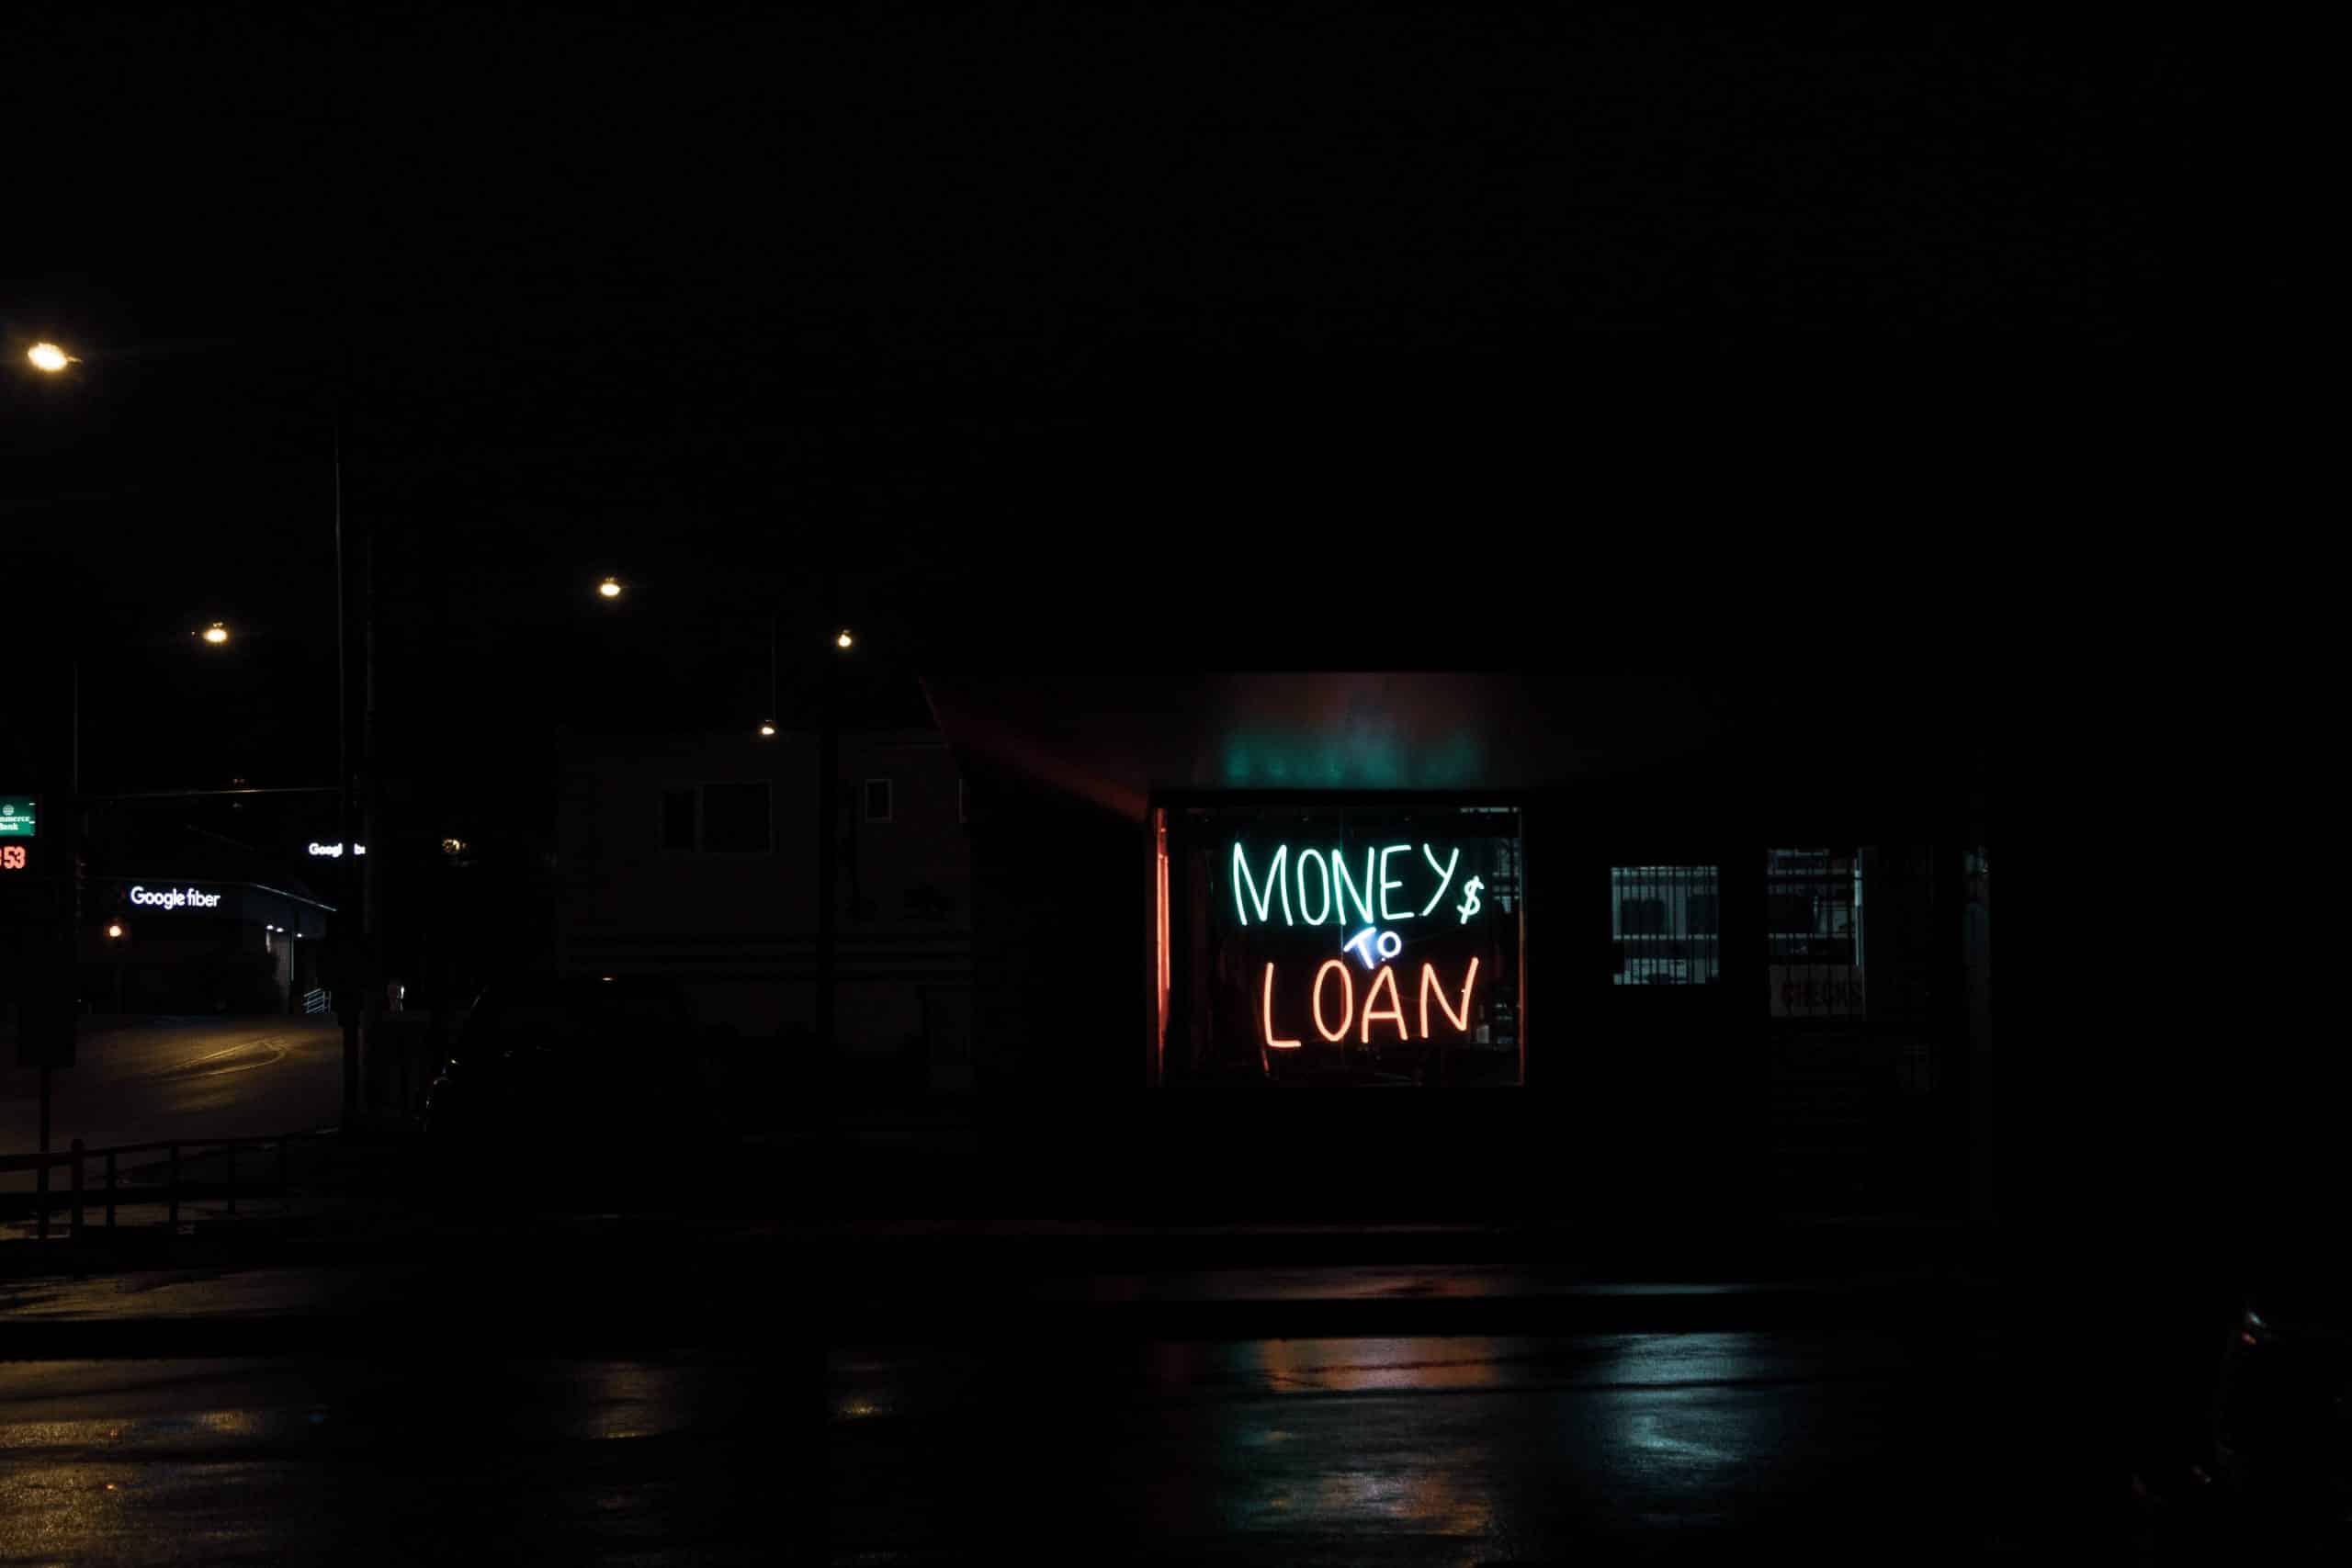 Money to loan sign at night